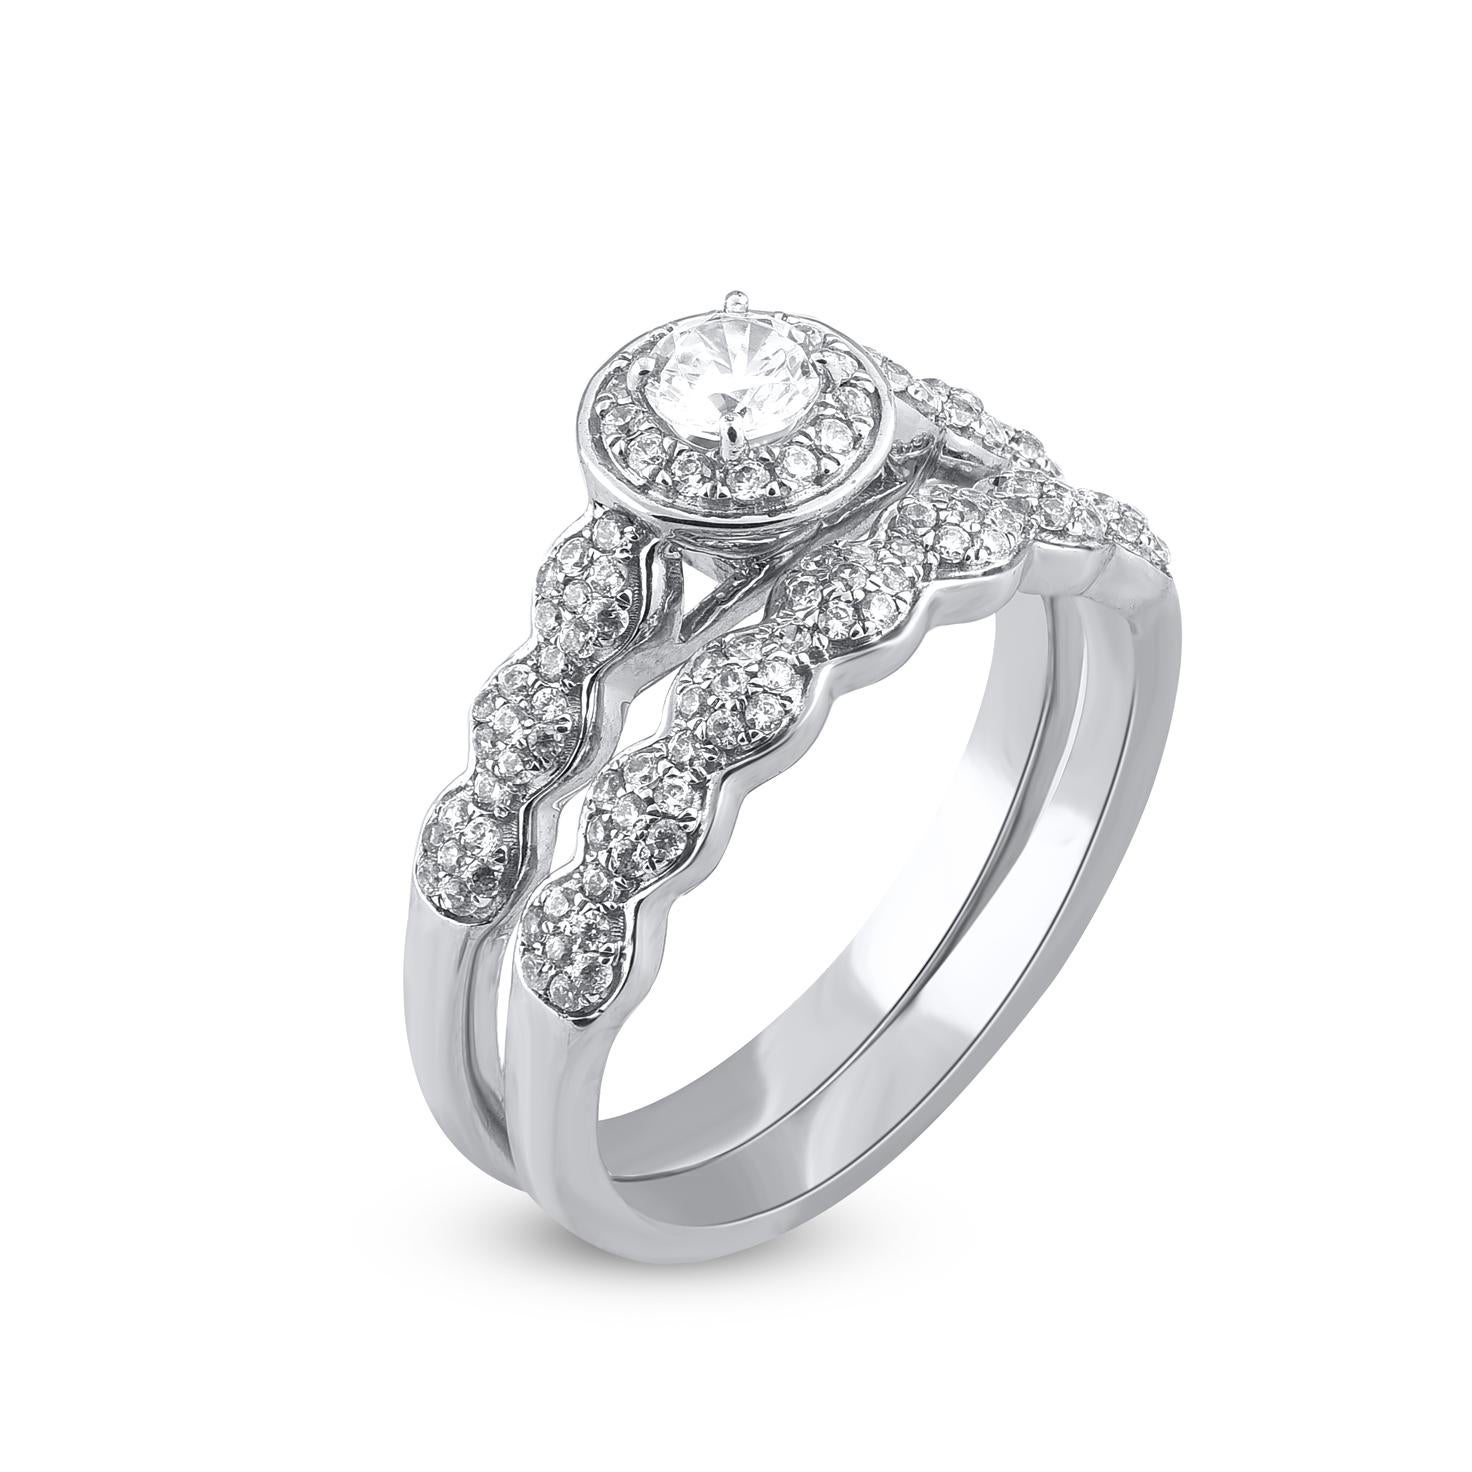 Contemporary TJD 0.66 Carat Round Cut Diamond 14KT White Gold Vintage Style Bridal Ring Set For Sale